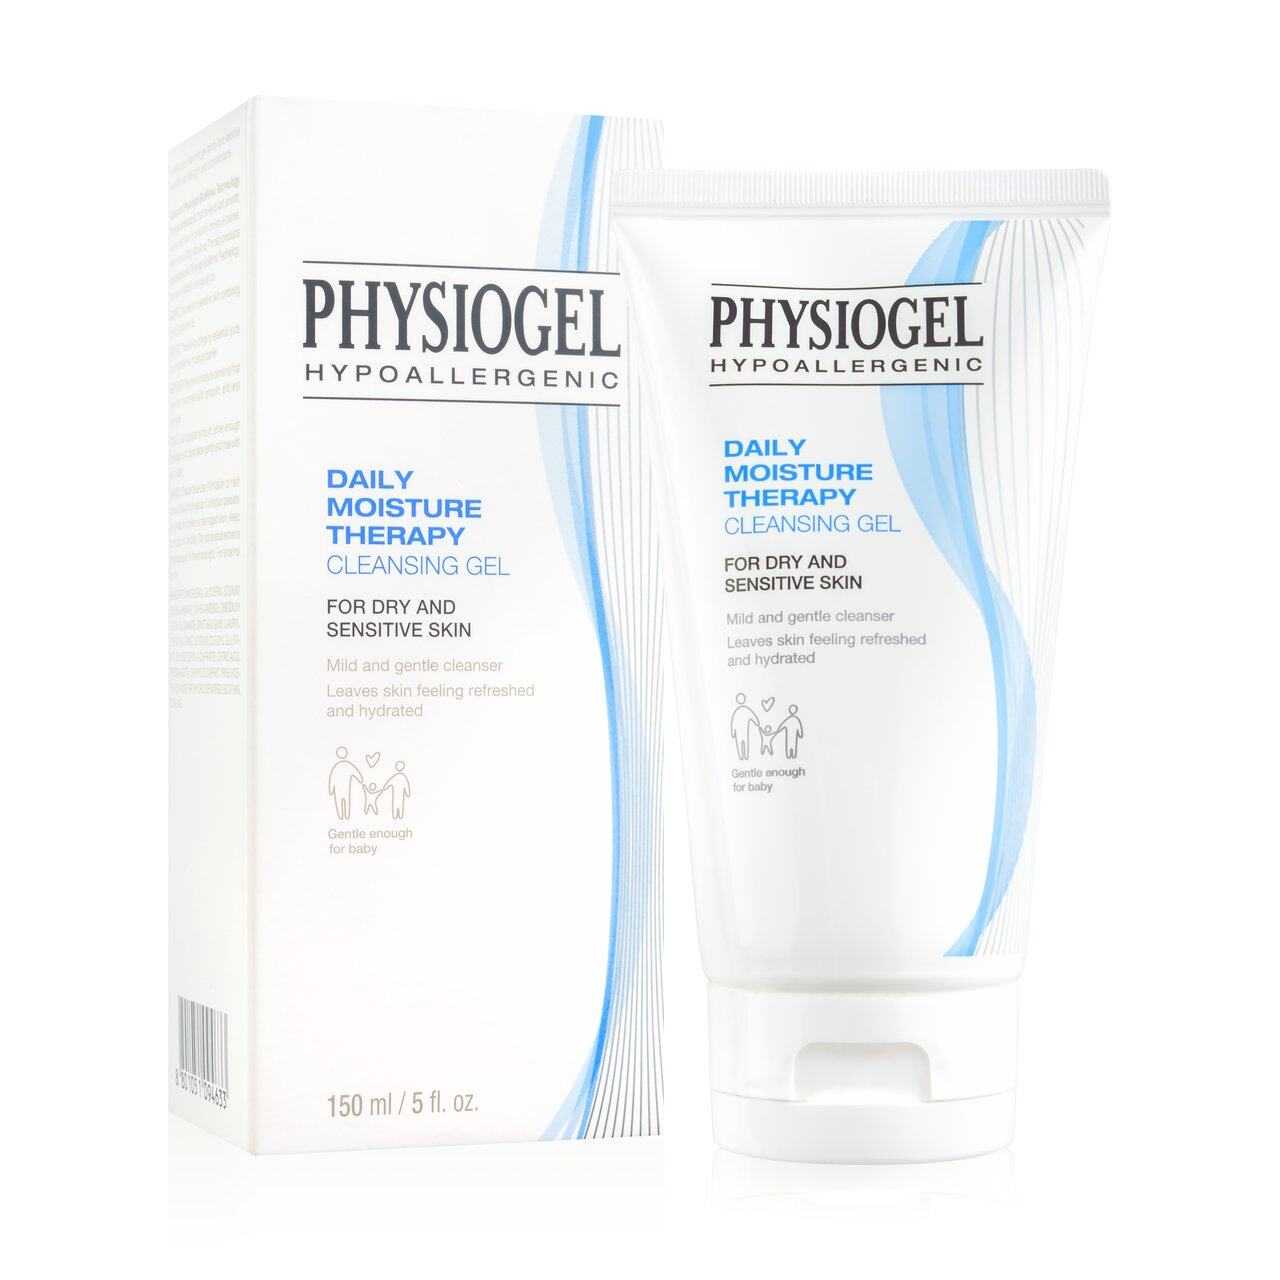 PHYSIOGEL Daily Moisture Therapy Cleansing Gel 150ml - DODOSKIN